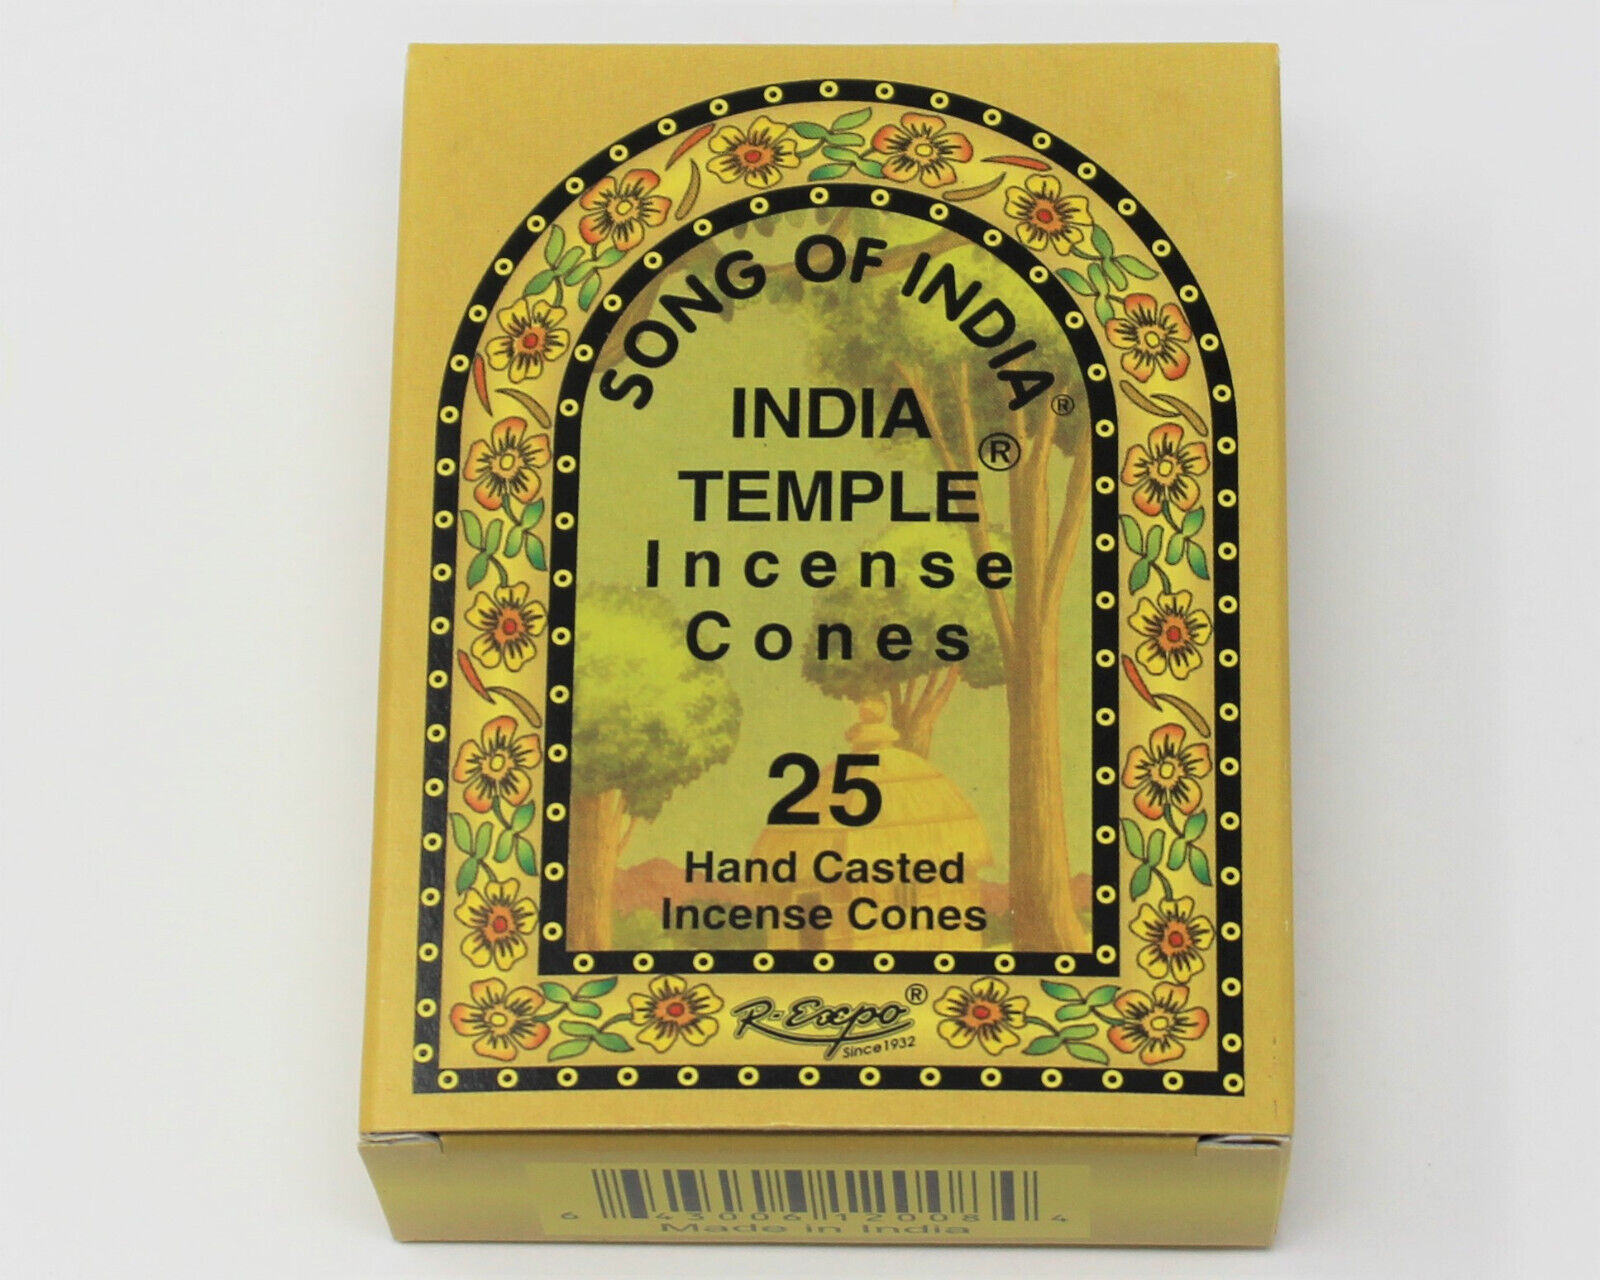 Song of India Incense Cones: Pick 25, 50, 75, 100, 125, 150 Indian Temple Cones